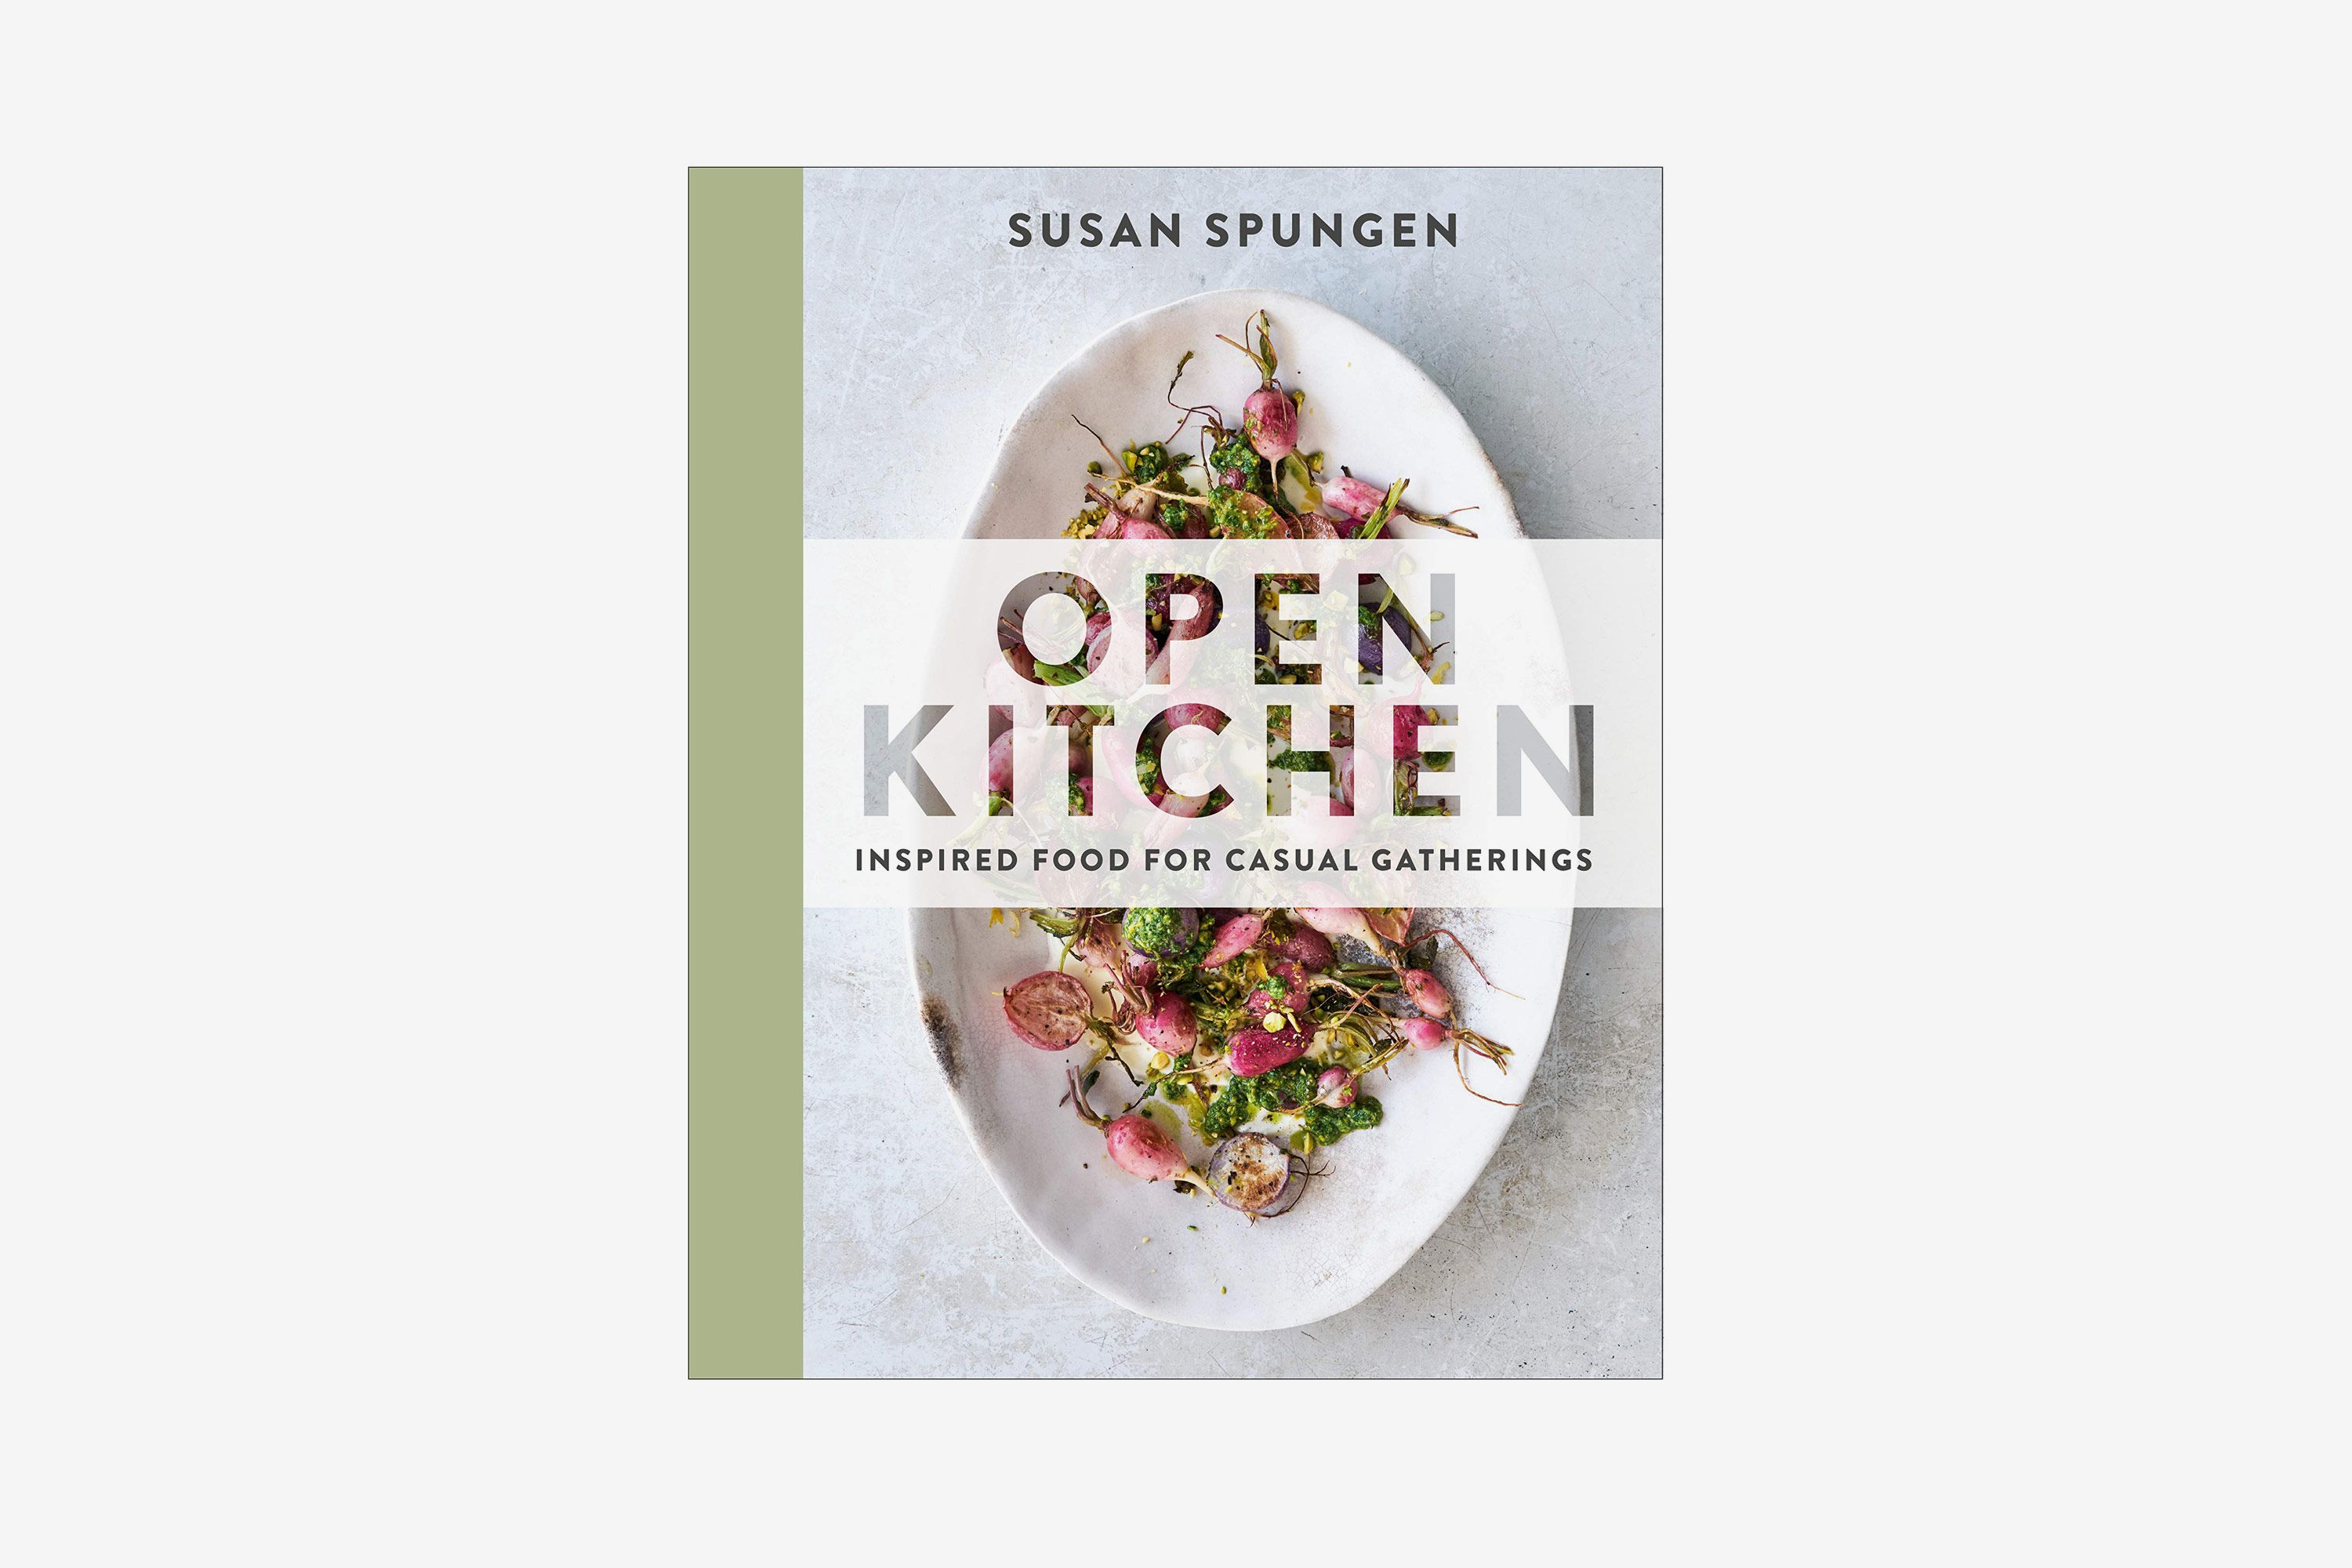 27 Best Cookbooks of All Time, According to Goodreads